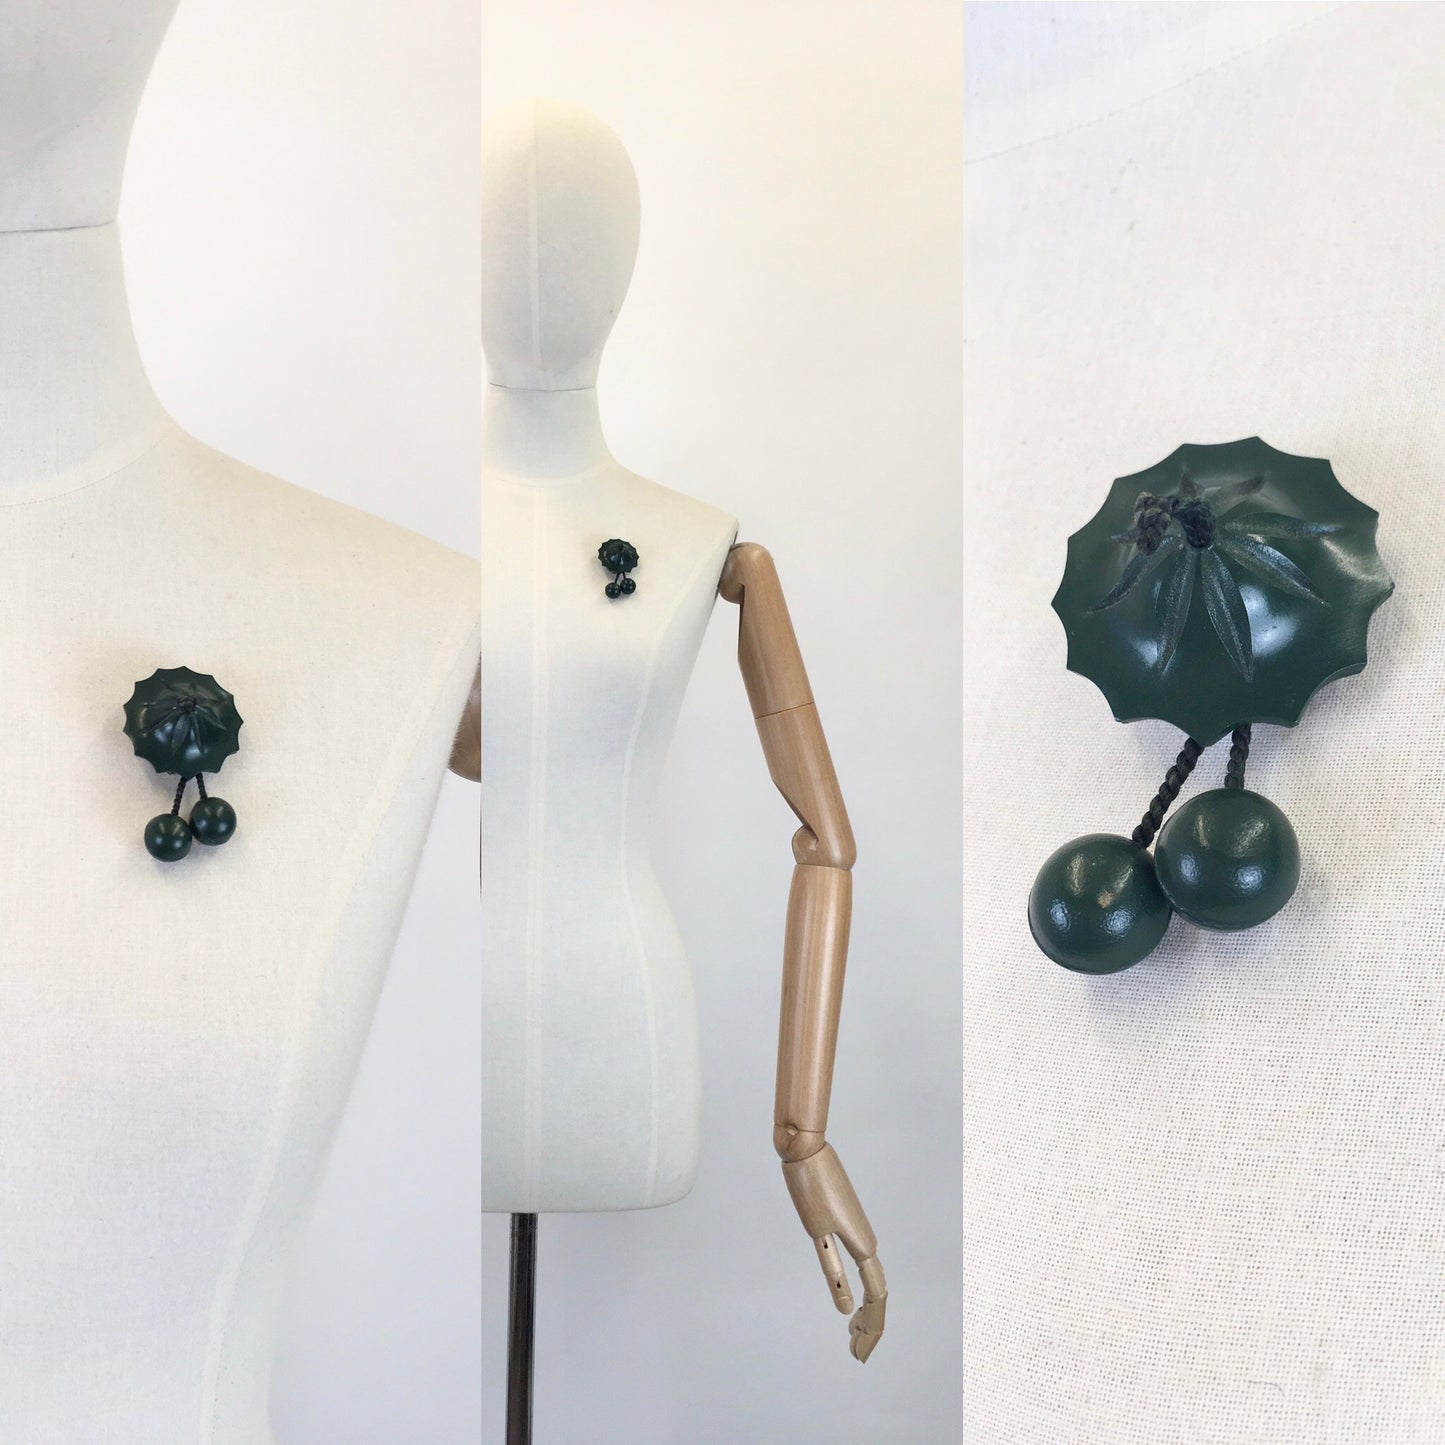 Original 1940’s Early Plastic Brooch in Forest Green - In An Amazing Shape with Dangling Balls